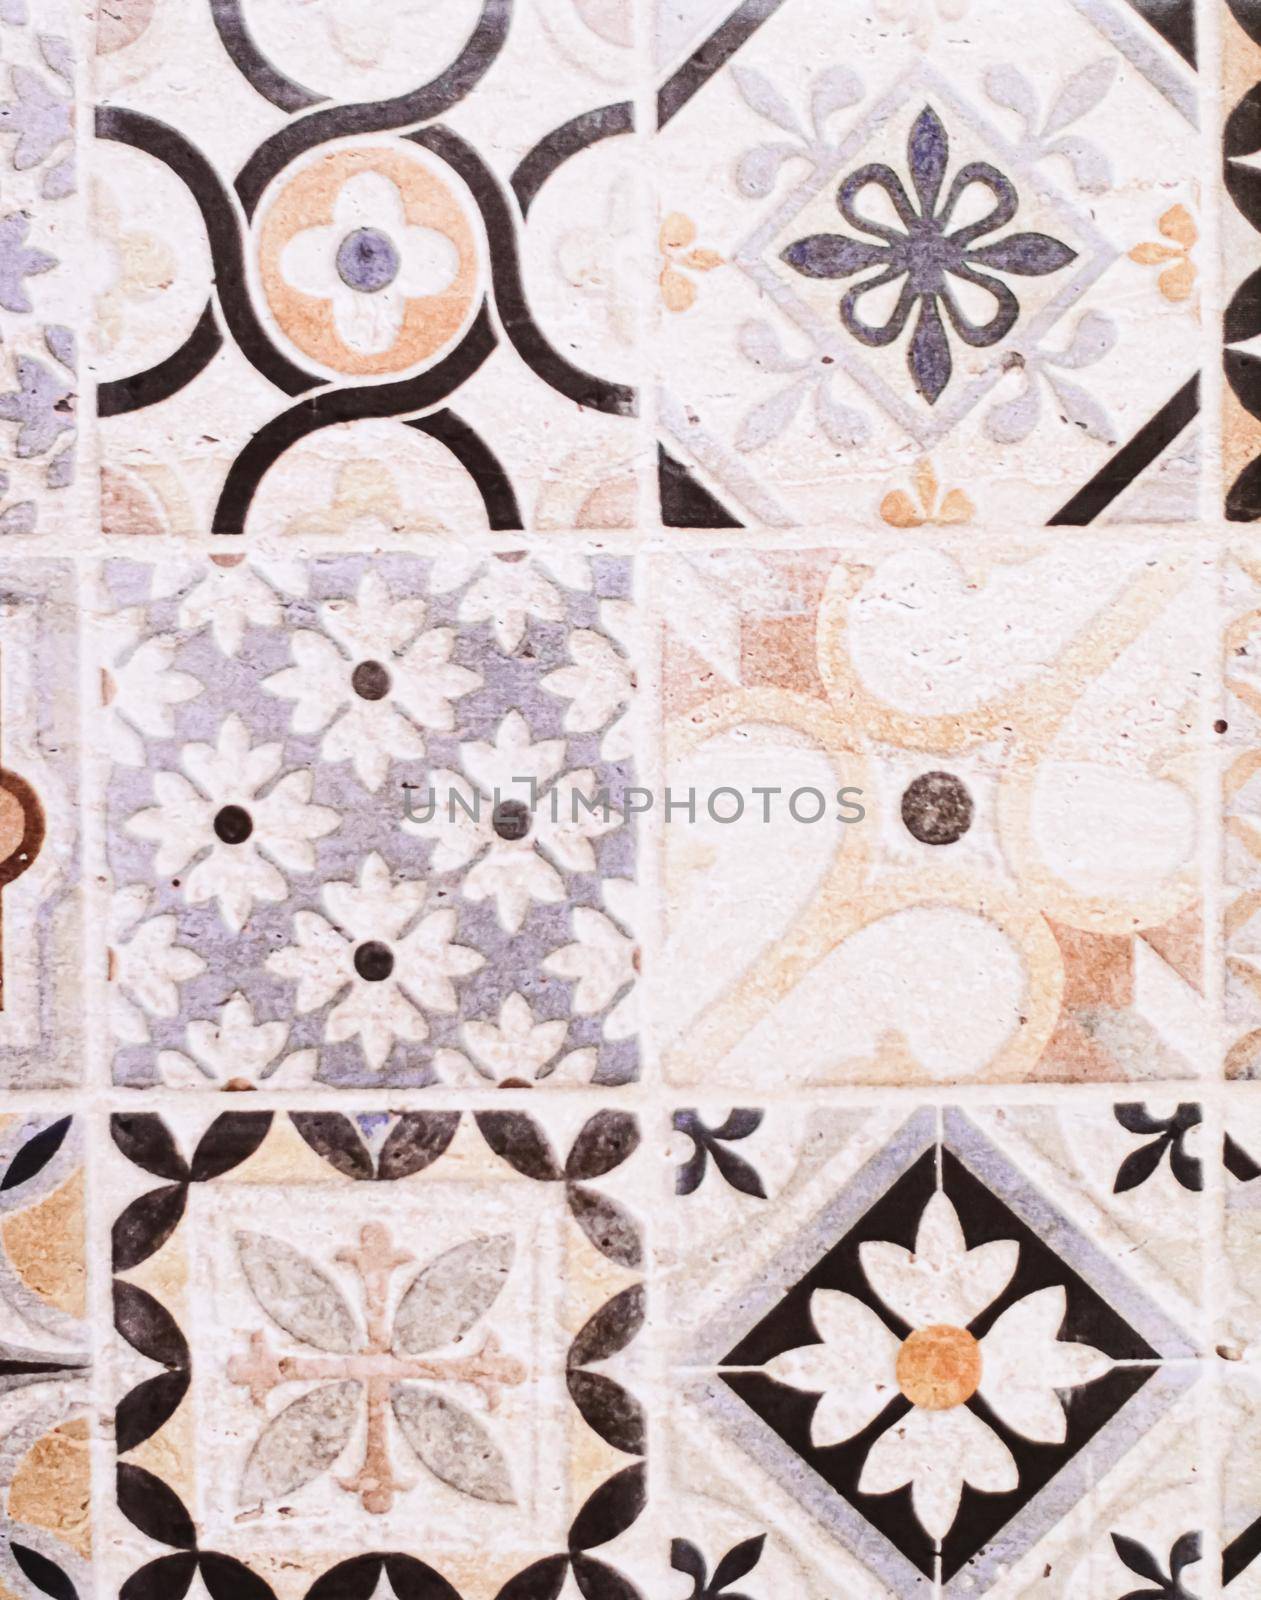 Luxury wall tiles texture as surface background, interior design and decorative flatlay backdrop